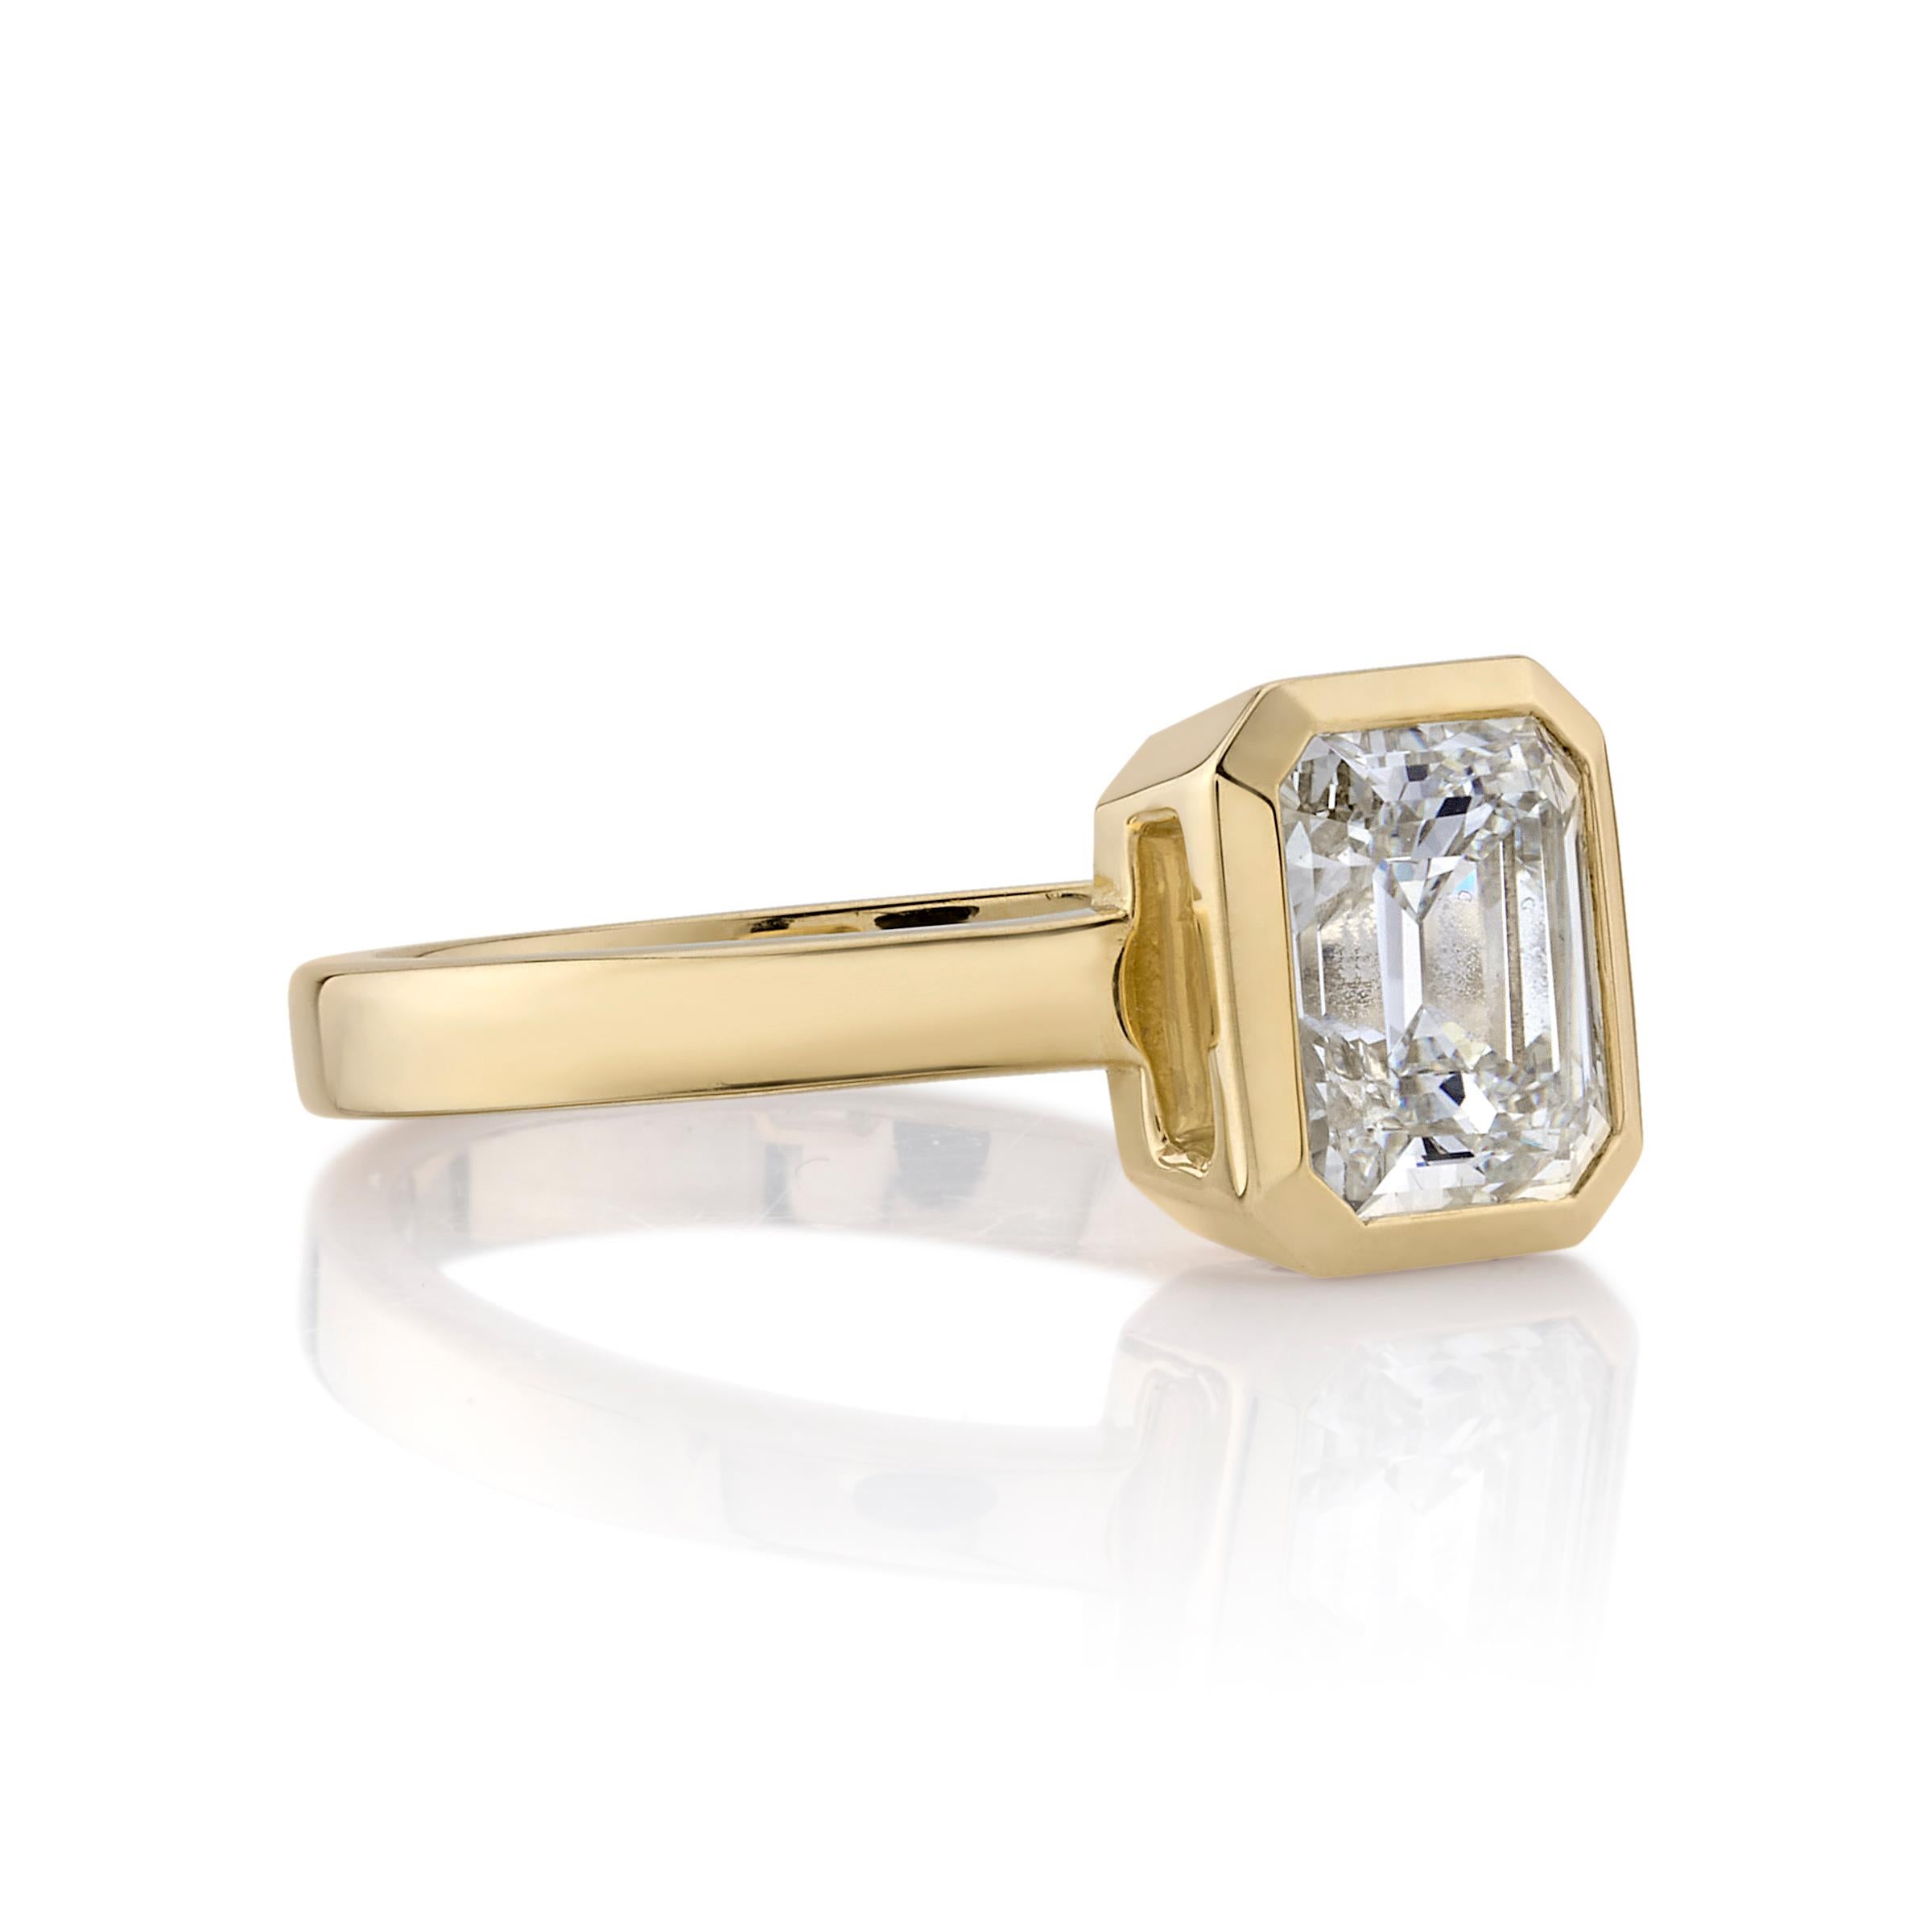 1.61ctw J/SI1 GIA certified Emerald cut diamond set in a handcrafted 18K yellow gold mounting.

Ring is currently size 6. Please contact us about potential re-sizing.

Our jewelry is made locally in Los Angeles and most pieces are made to order. For